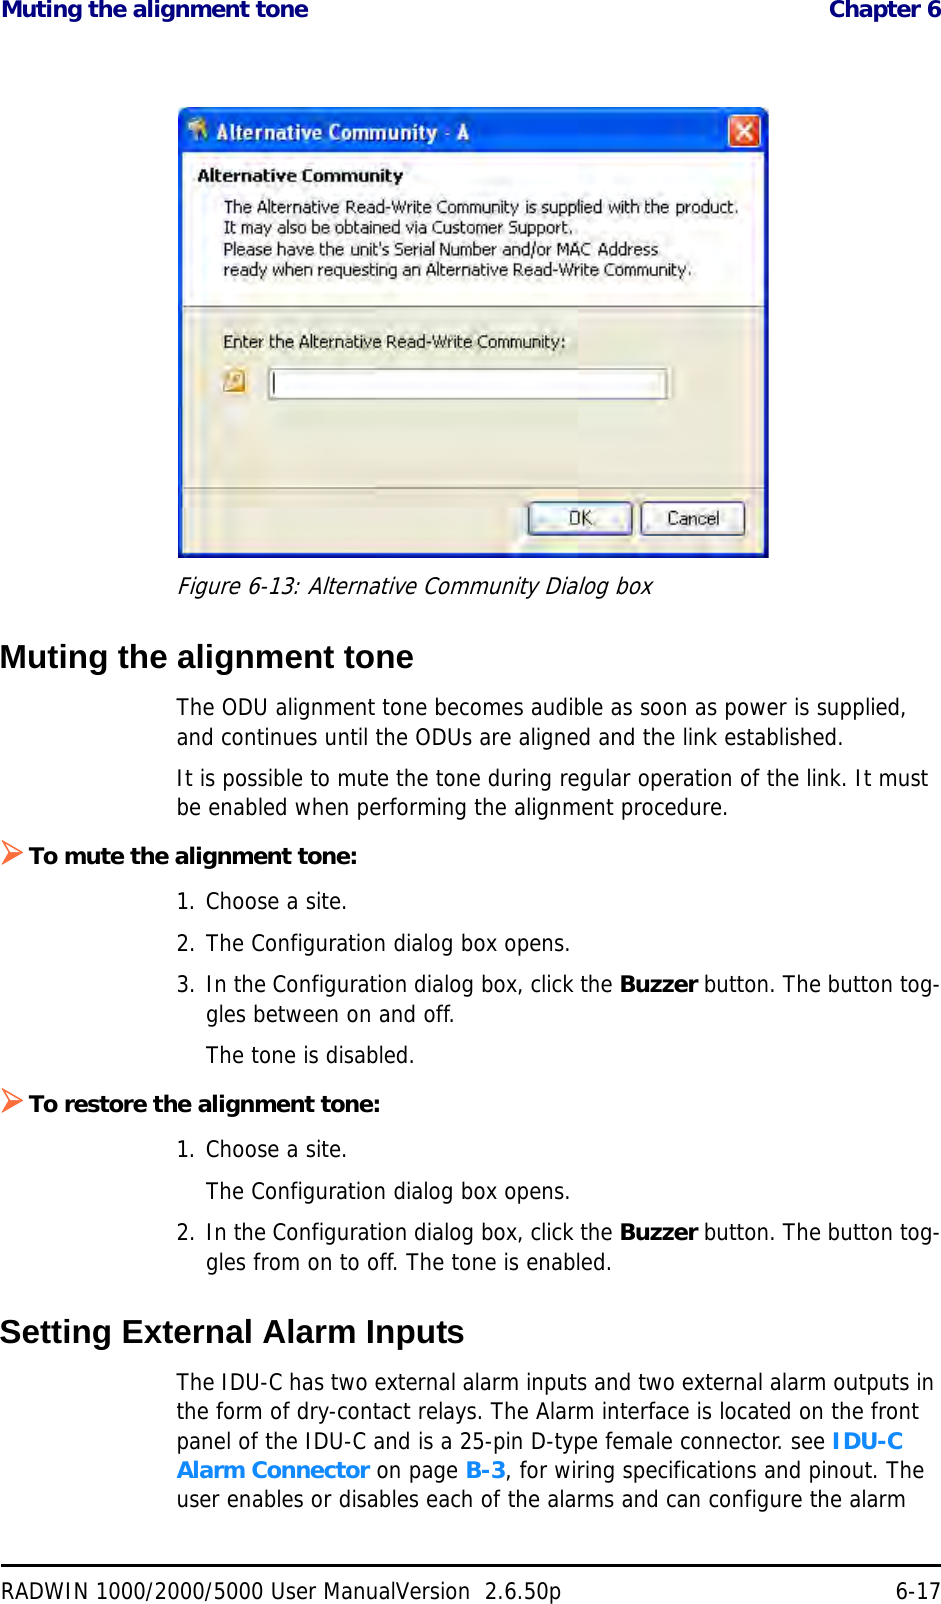 Muting the alignment tone  Chapter 6RADWIN 1000/2000/5000 User ManualVersion  2.6.50p 6-17Figure 6-13: Alternative Community Dialog boxMuting the alignment toneThe ODU alignment tone becomes audible as soon as power is supplied, and continues until the ODUs are aligned and the link established.It is possible to mute the tone during regular operation of the link. It must be enabled when performing the alignment procedure.To mute the alignment tone:1. Choose a site.2. The Configuration dialog box opens.3. In the Configuration dialog box, click the Buzzer button. The button tog-gles between on and off.The tone is disabled.To restore the alignment tone:1. Choose a site.The Configuration dialog box opens.2. In the Configuration dialog box, click the Buzzer button. The button tog-gles from on to off. The tone is enabled.Setting External Alarm InputsThe IDU-C has two external alarm inputs and two external alarm outputs in the form of dry-contact relays. The Alarm interface is located on the front panel of the IDU-C and is a 25-pin D-type female connector. see IDU-C Alarm Connector on page B-3, for wiring specifications and pinout. The user enables or disables each of the alarms and can configure the alarm 